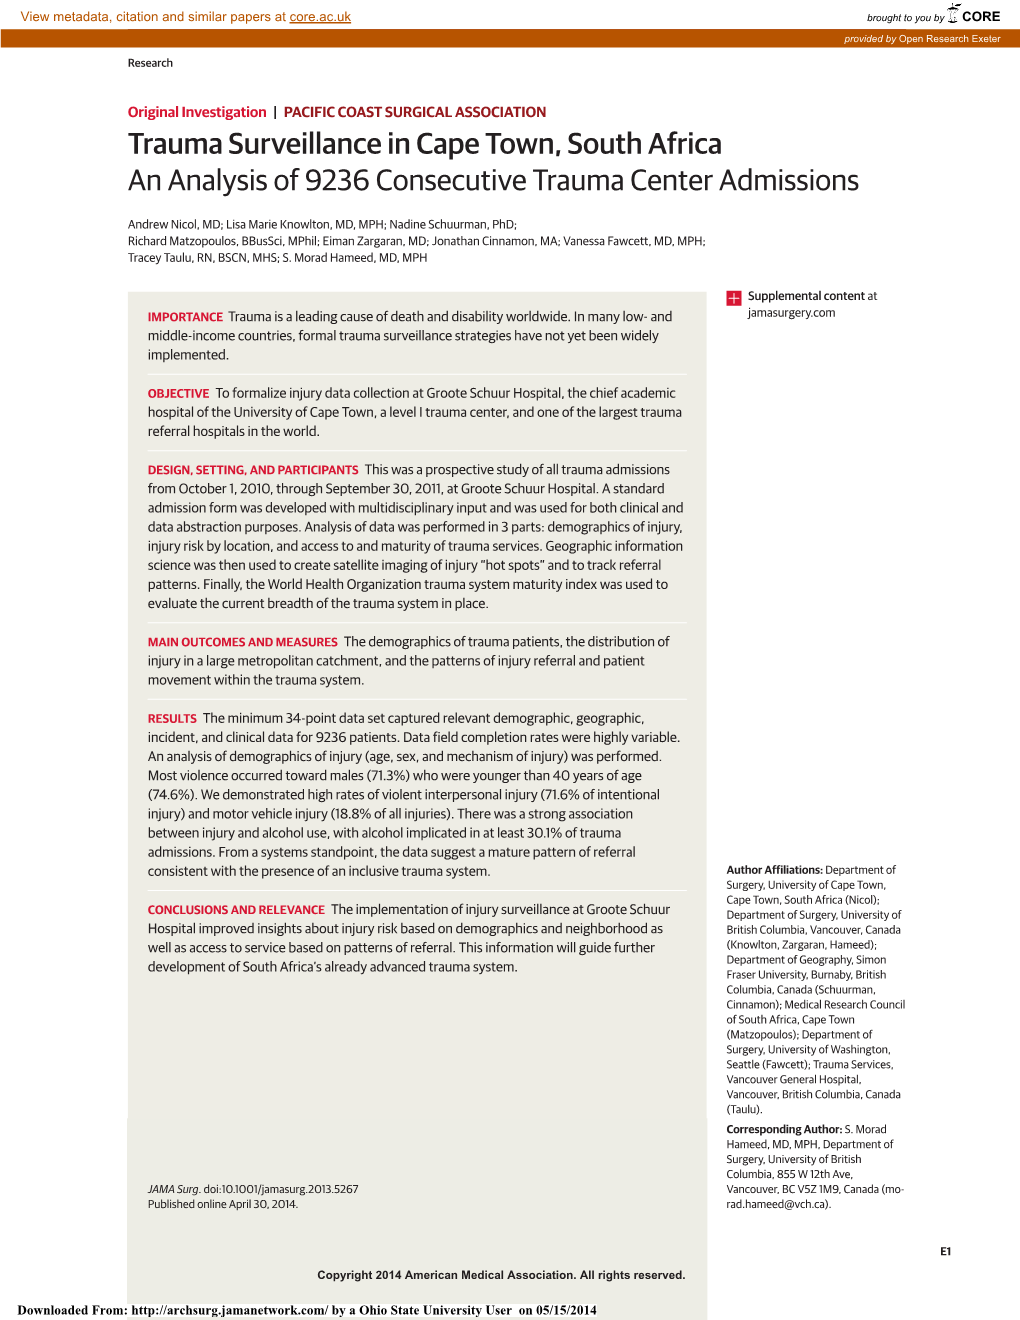 Trauma Surveillance in Cape Town, South Africa an Analysis of 9236 Consecutive Trauma Center Admissions